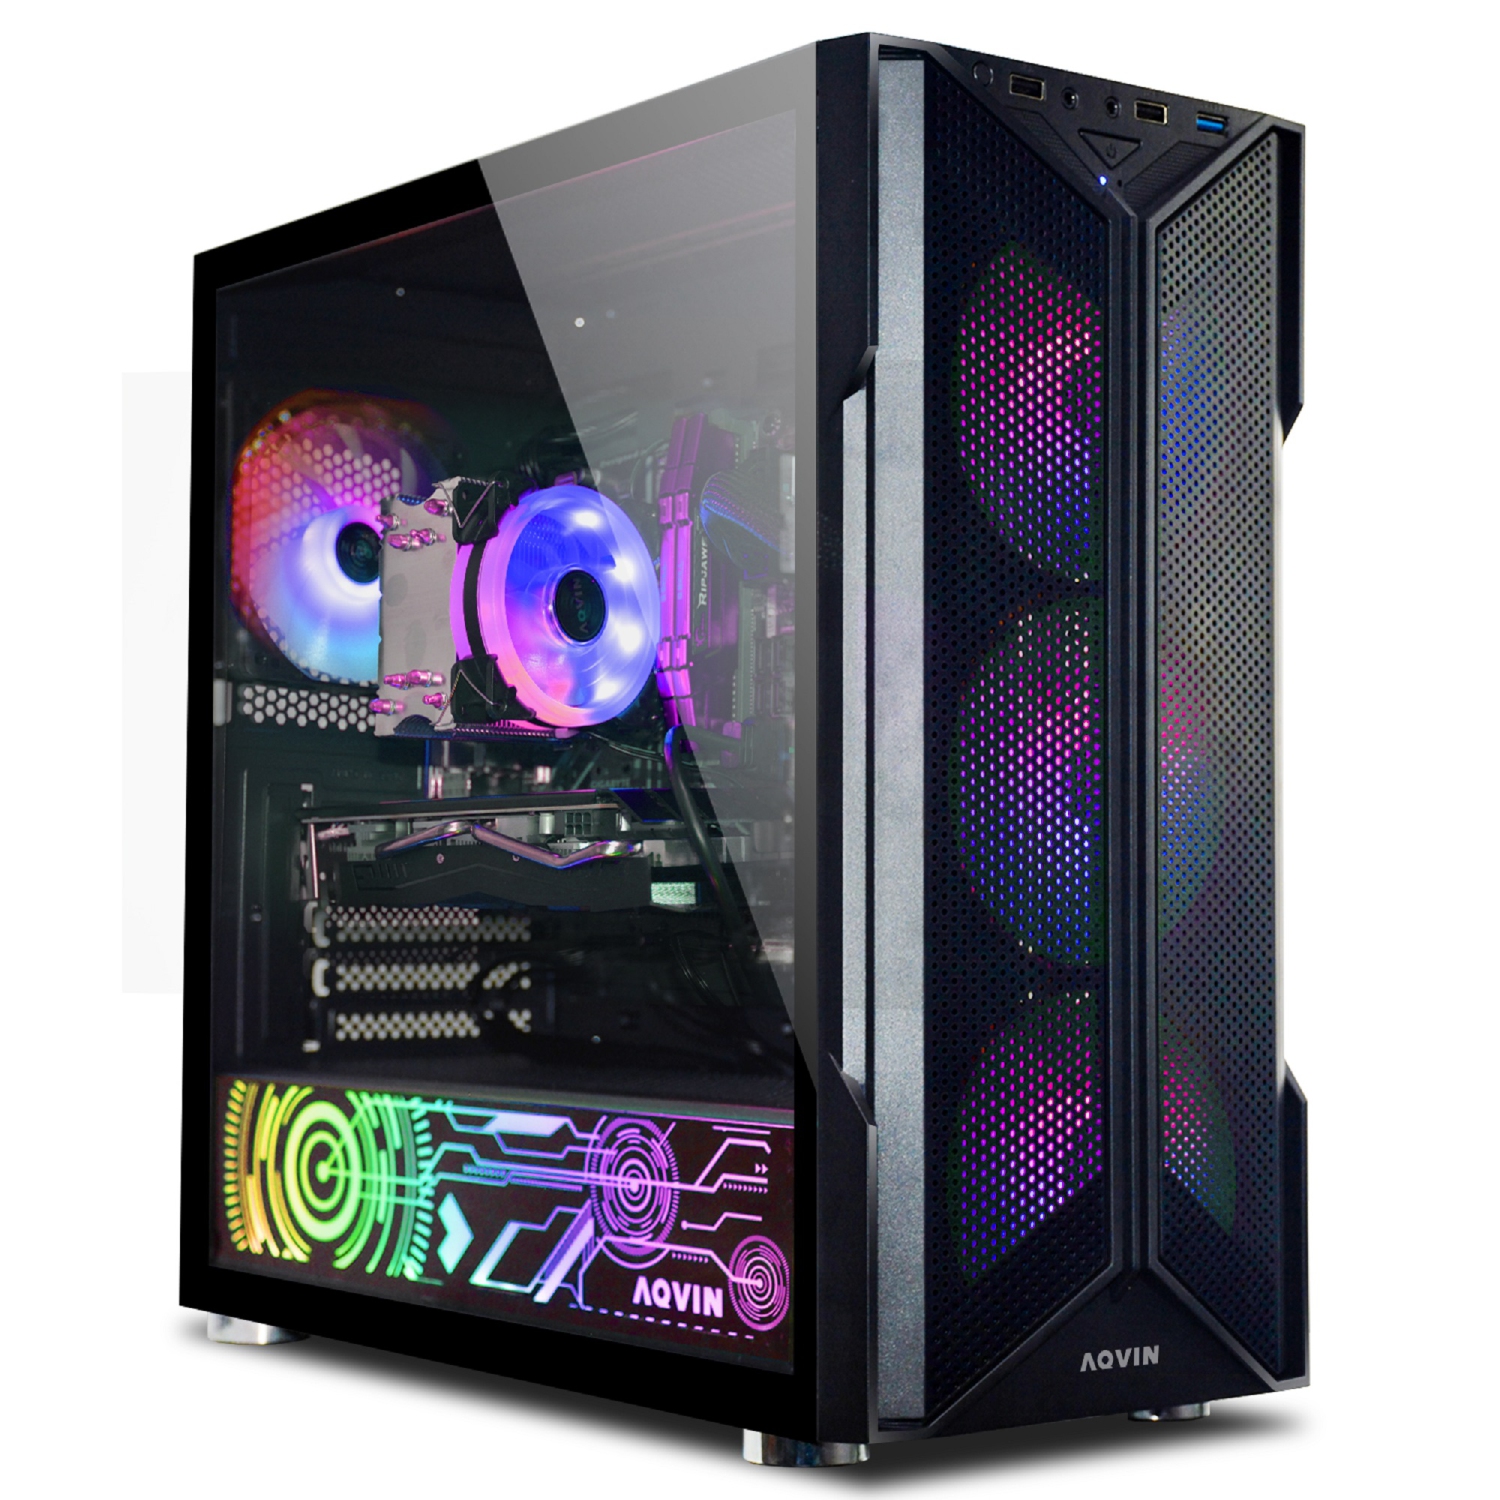 AQVIN-AQ20 Tower Desktop Computer Gaming PC / Intel Core i5 processor up to 4.00 GHz, 32GB DDR4 RAM, 1TB SSD, GeForce GTX 1660 Super 6GB, Windows 11, RGB Gaming Keyboard and Mouse